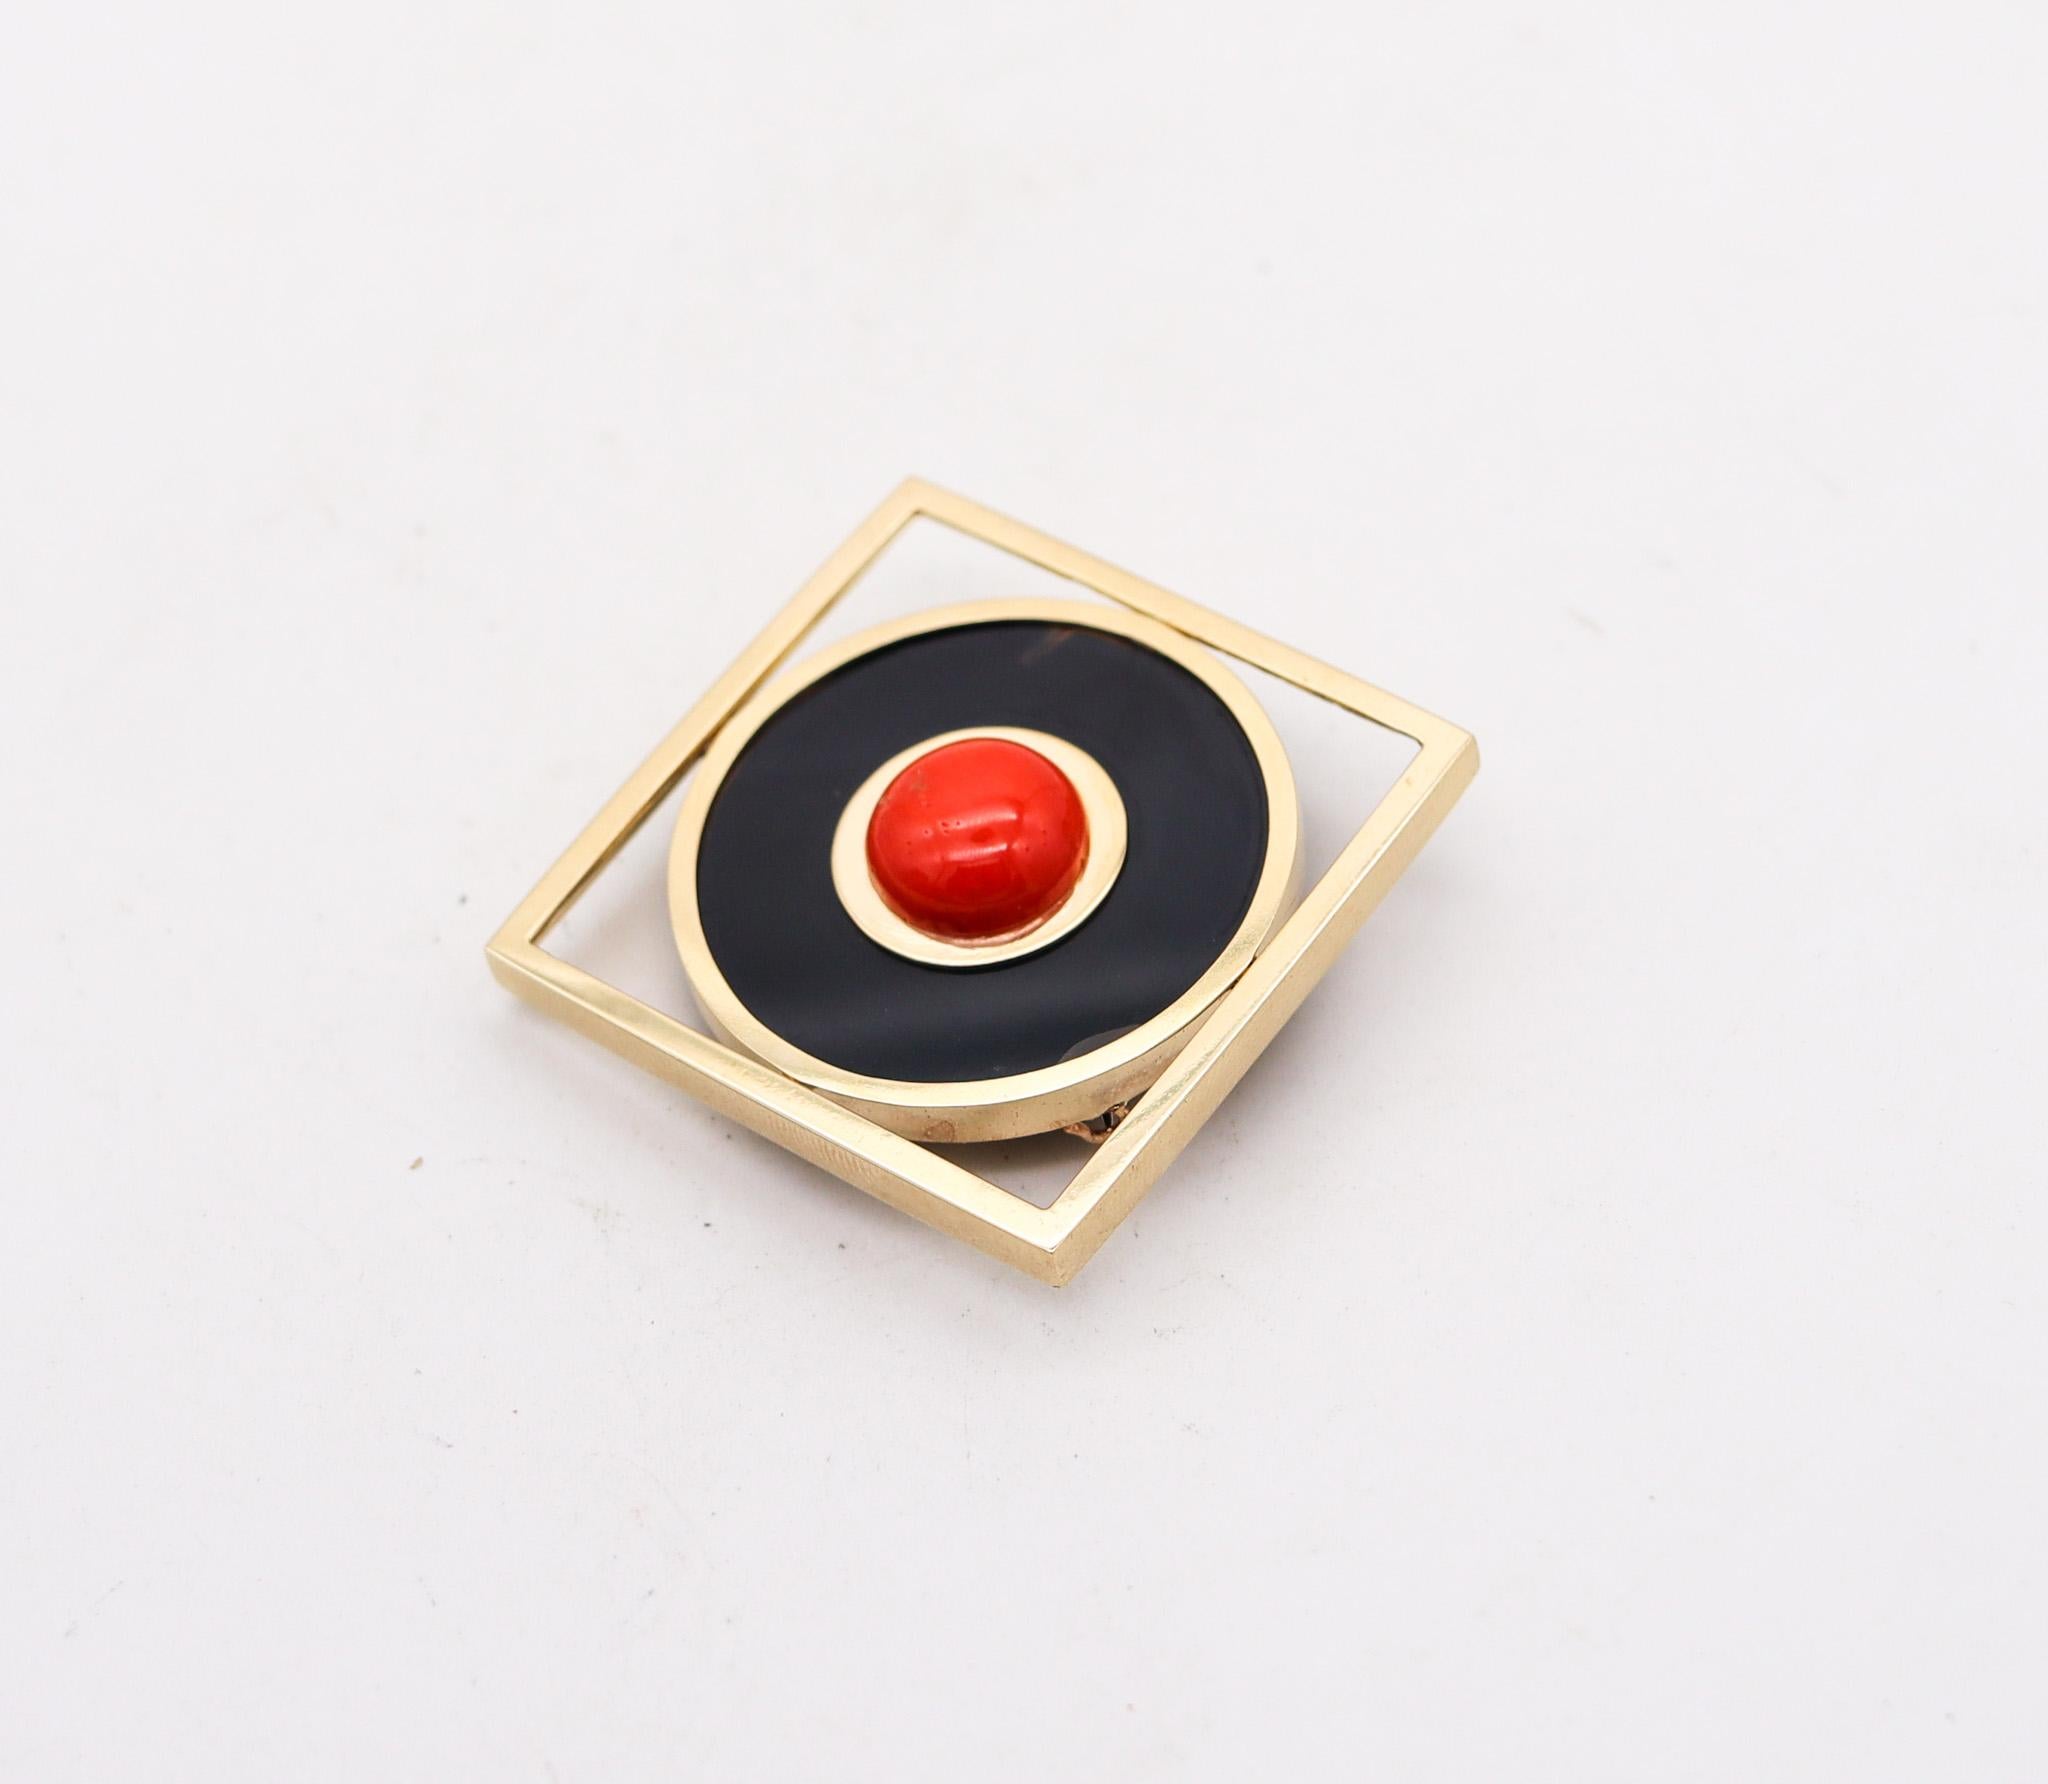 Italian convertible pendant brooch with coral.

A very versatile convertible pendant and brooch, created In Italy during the post modernism period, back in the 1980. It was crafted in solid yellow gold of 18 karats with high polished finish and is